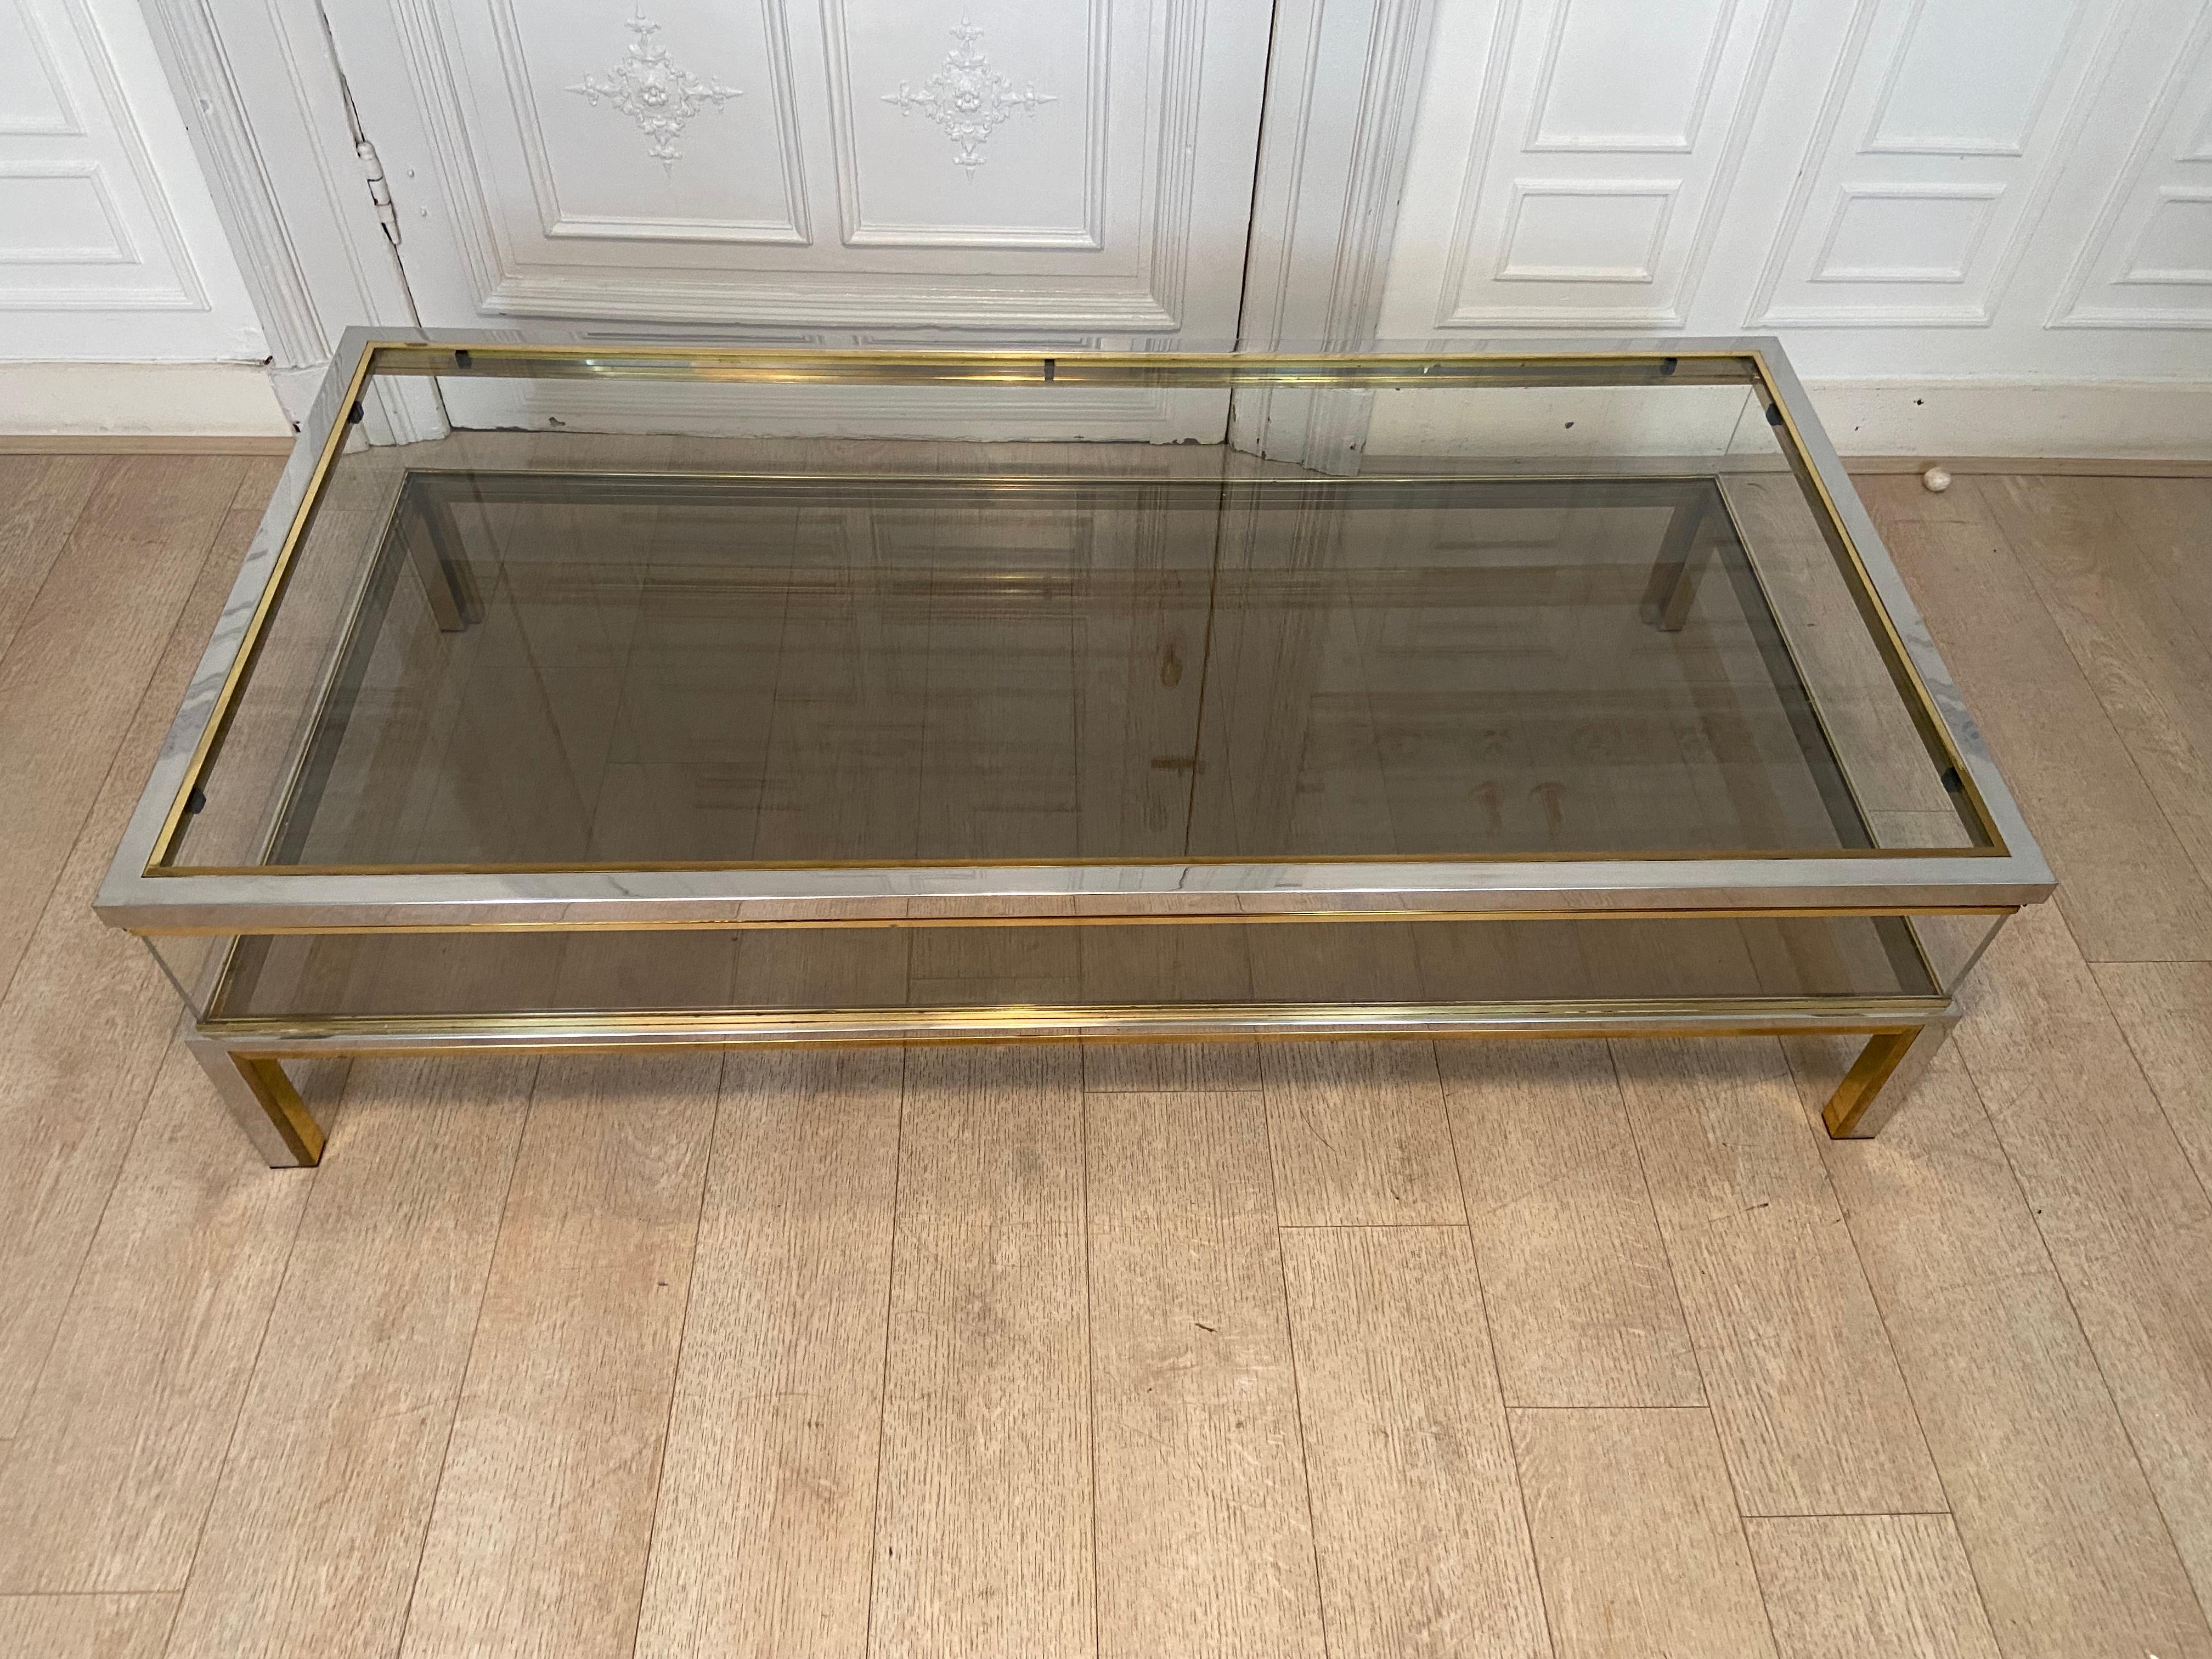 20th Century Midcentury Brass, Chrome, and Glass Showcase Coffee Table For Sale